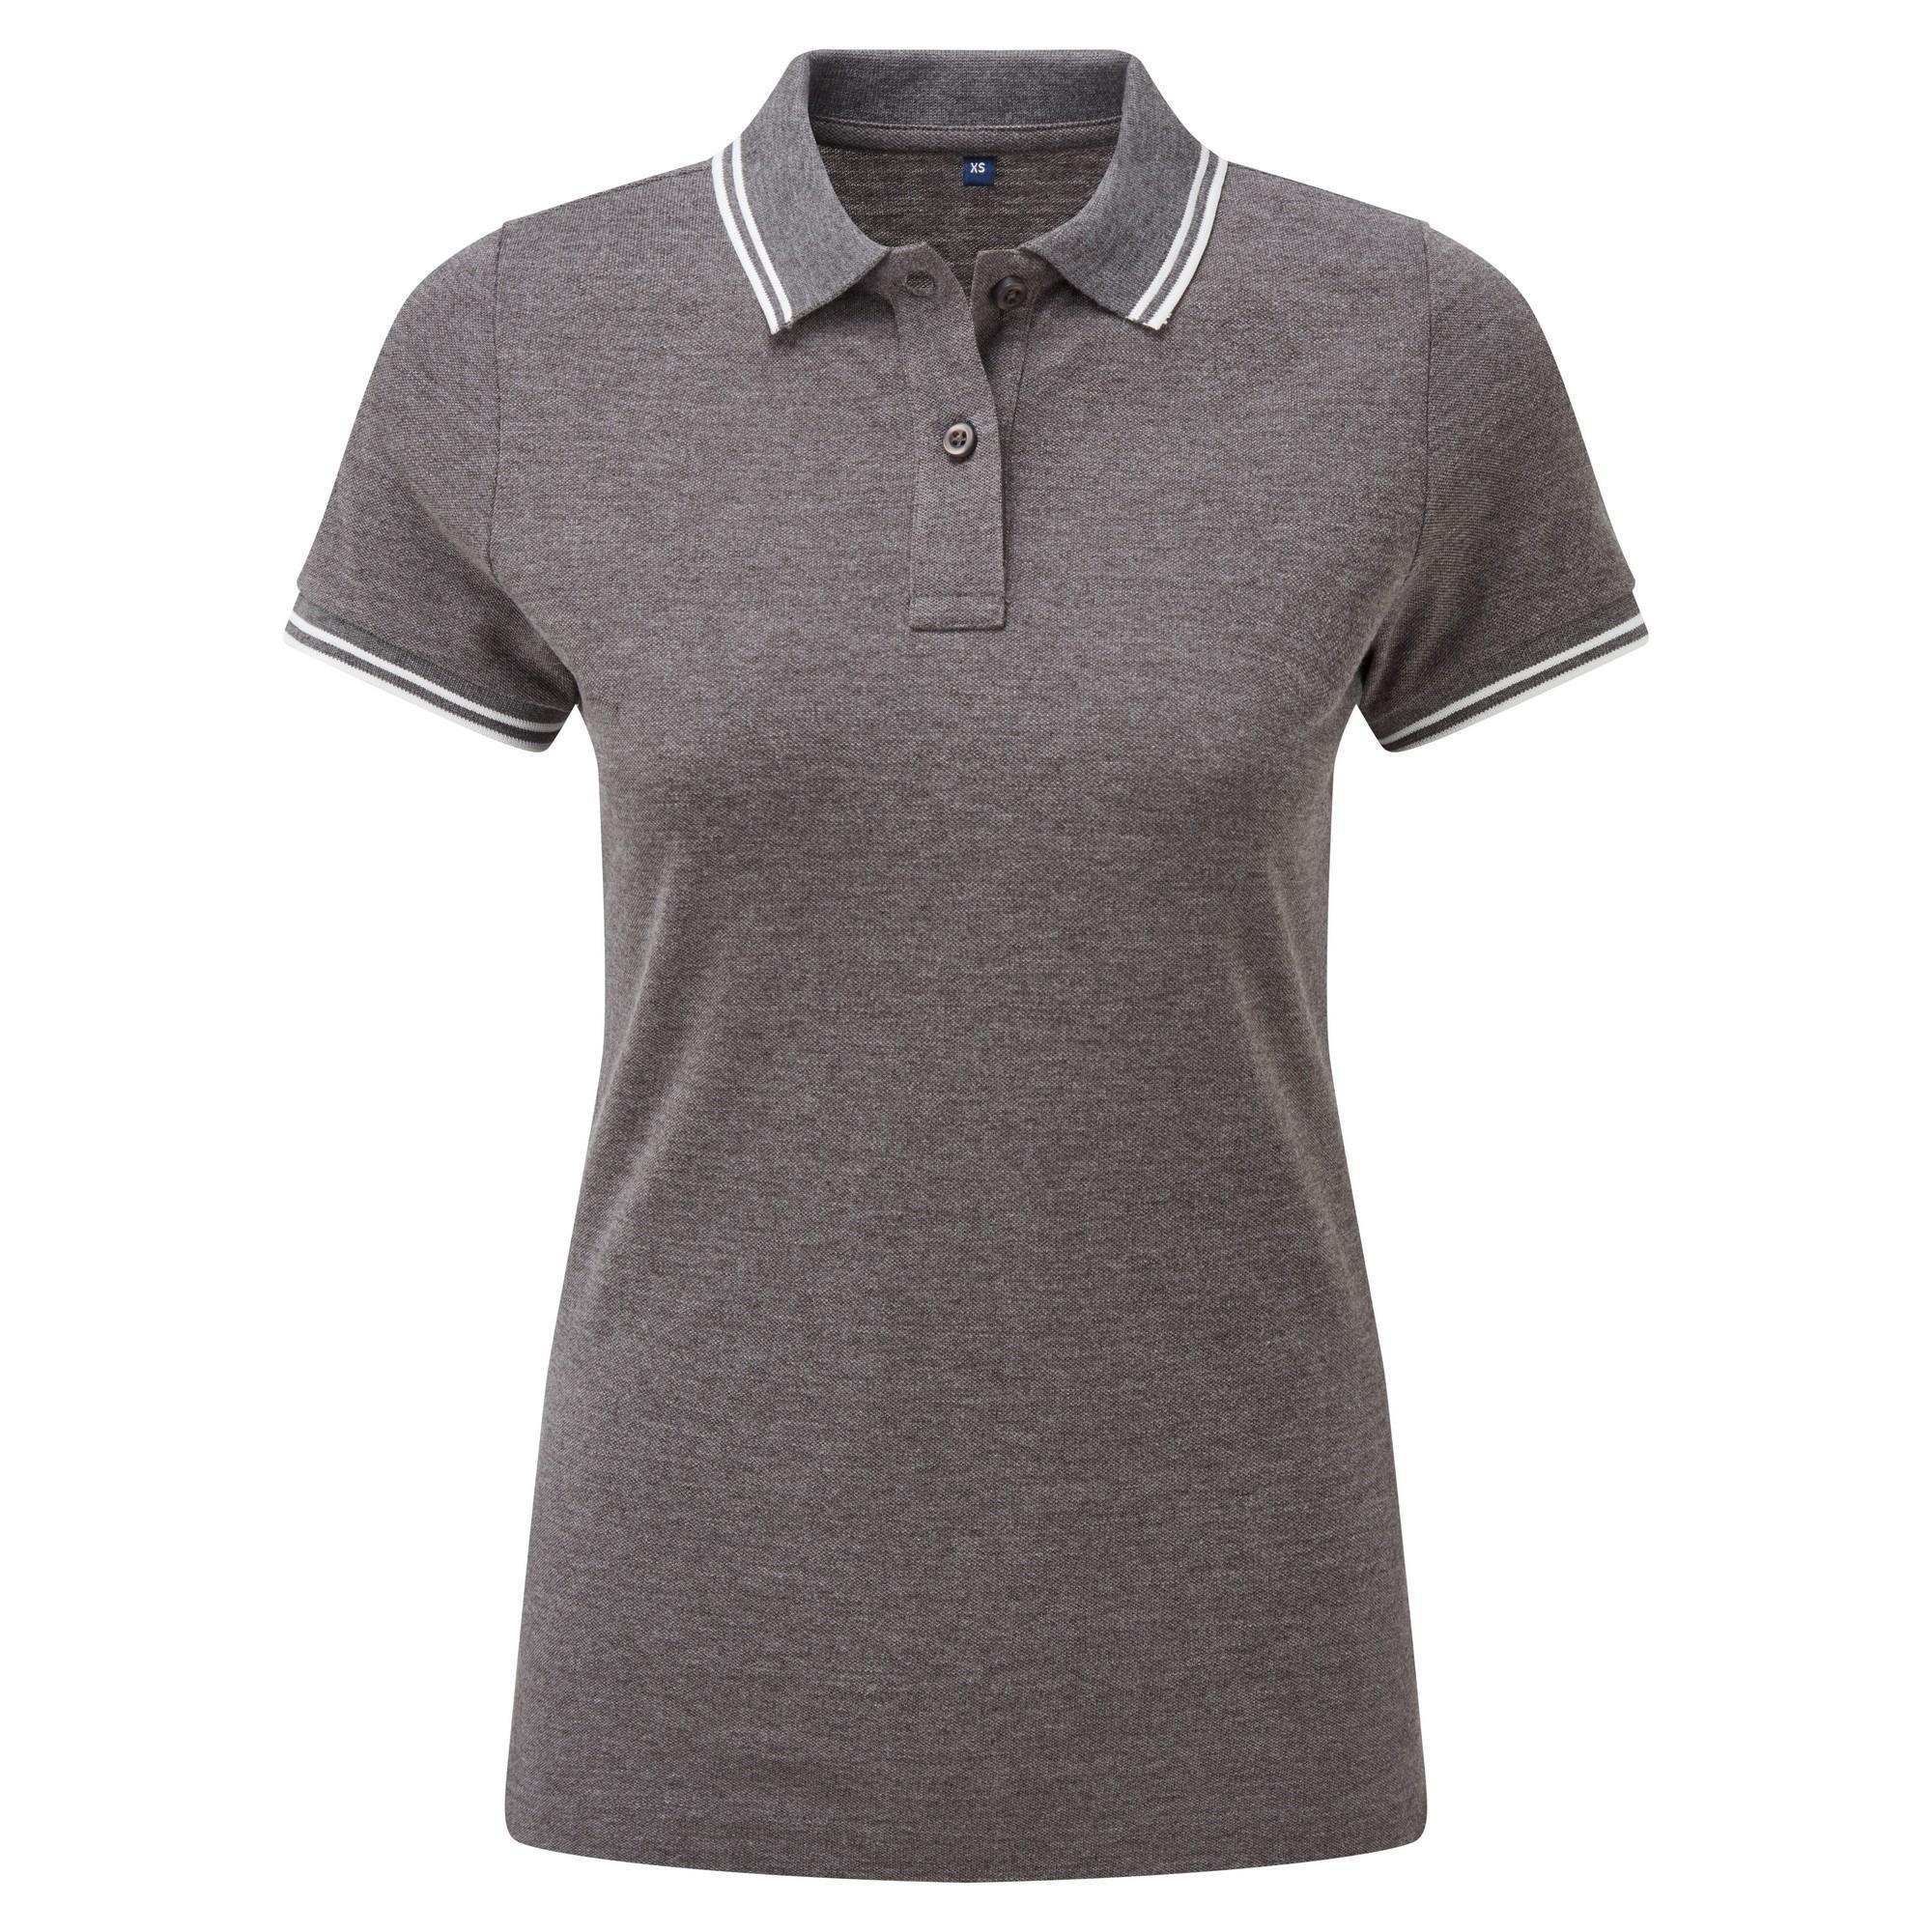 Asquith & Fox Womens/Ladies Classic Fit Tipped Polo (Charcoal/White) (S)